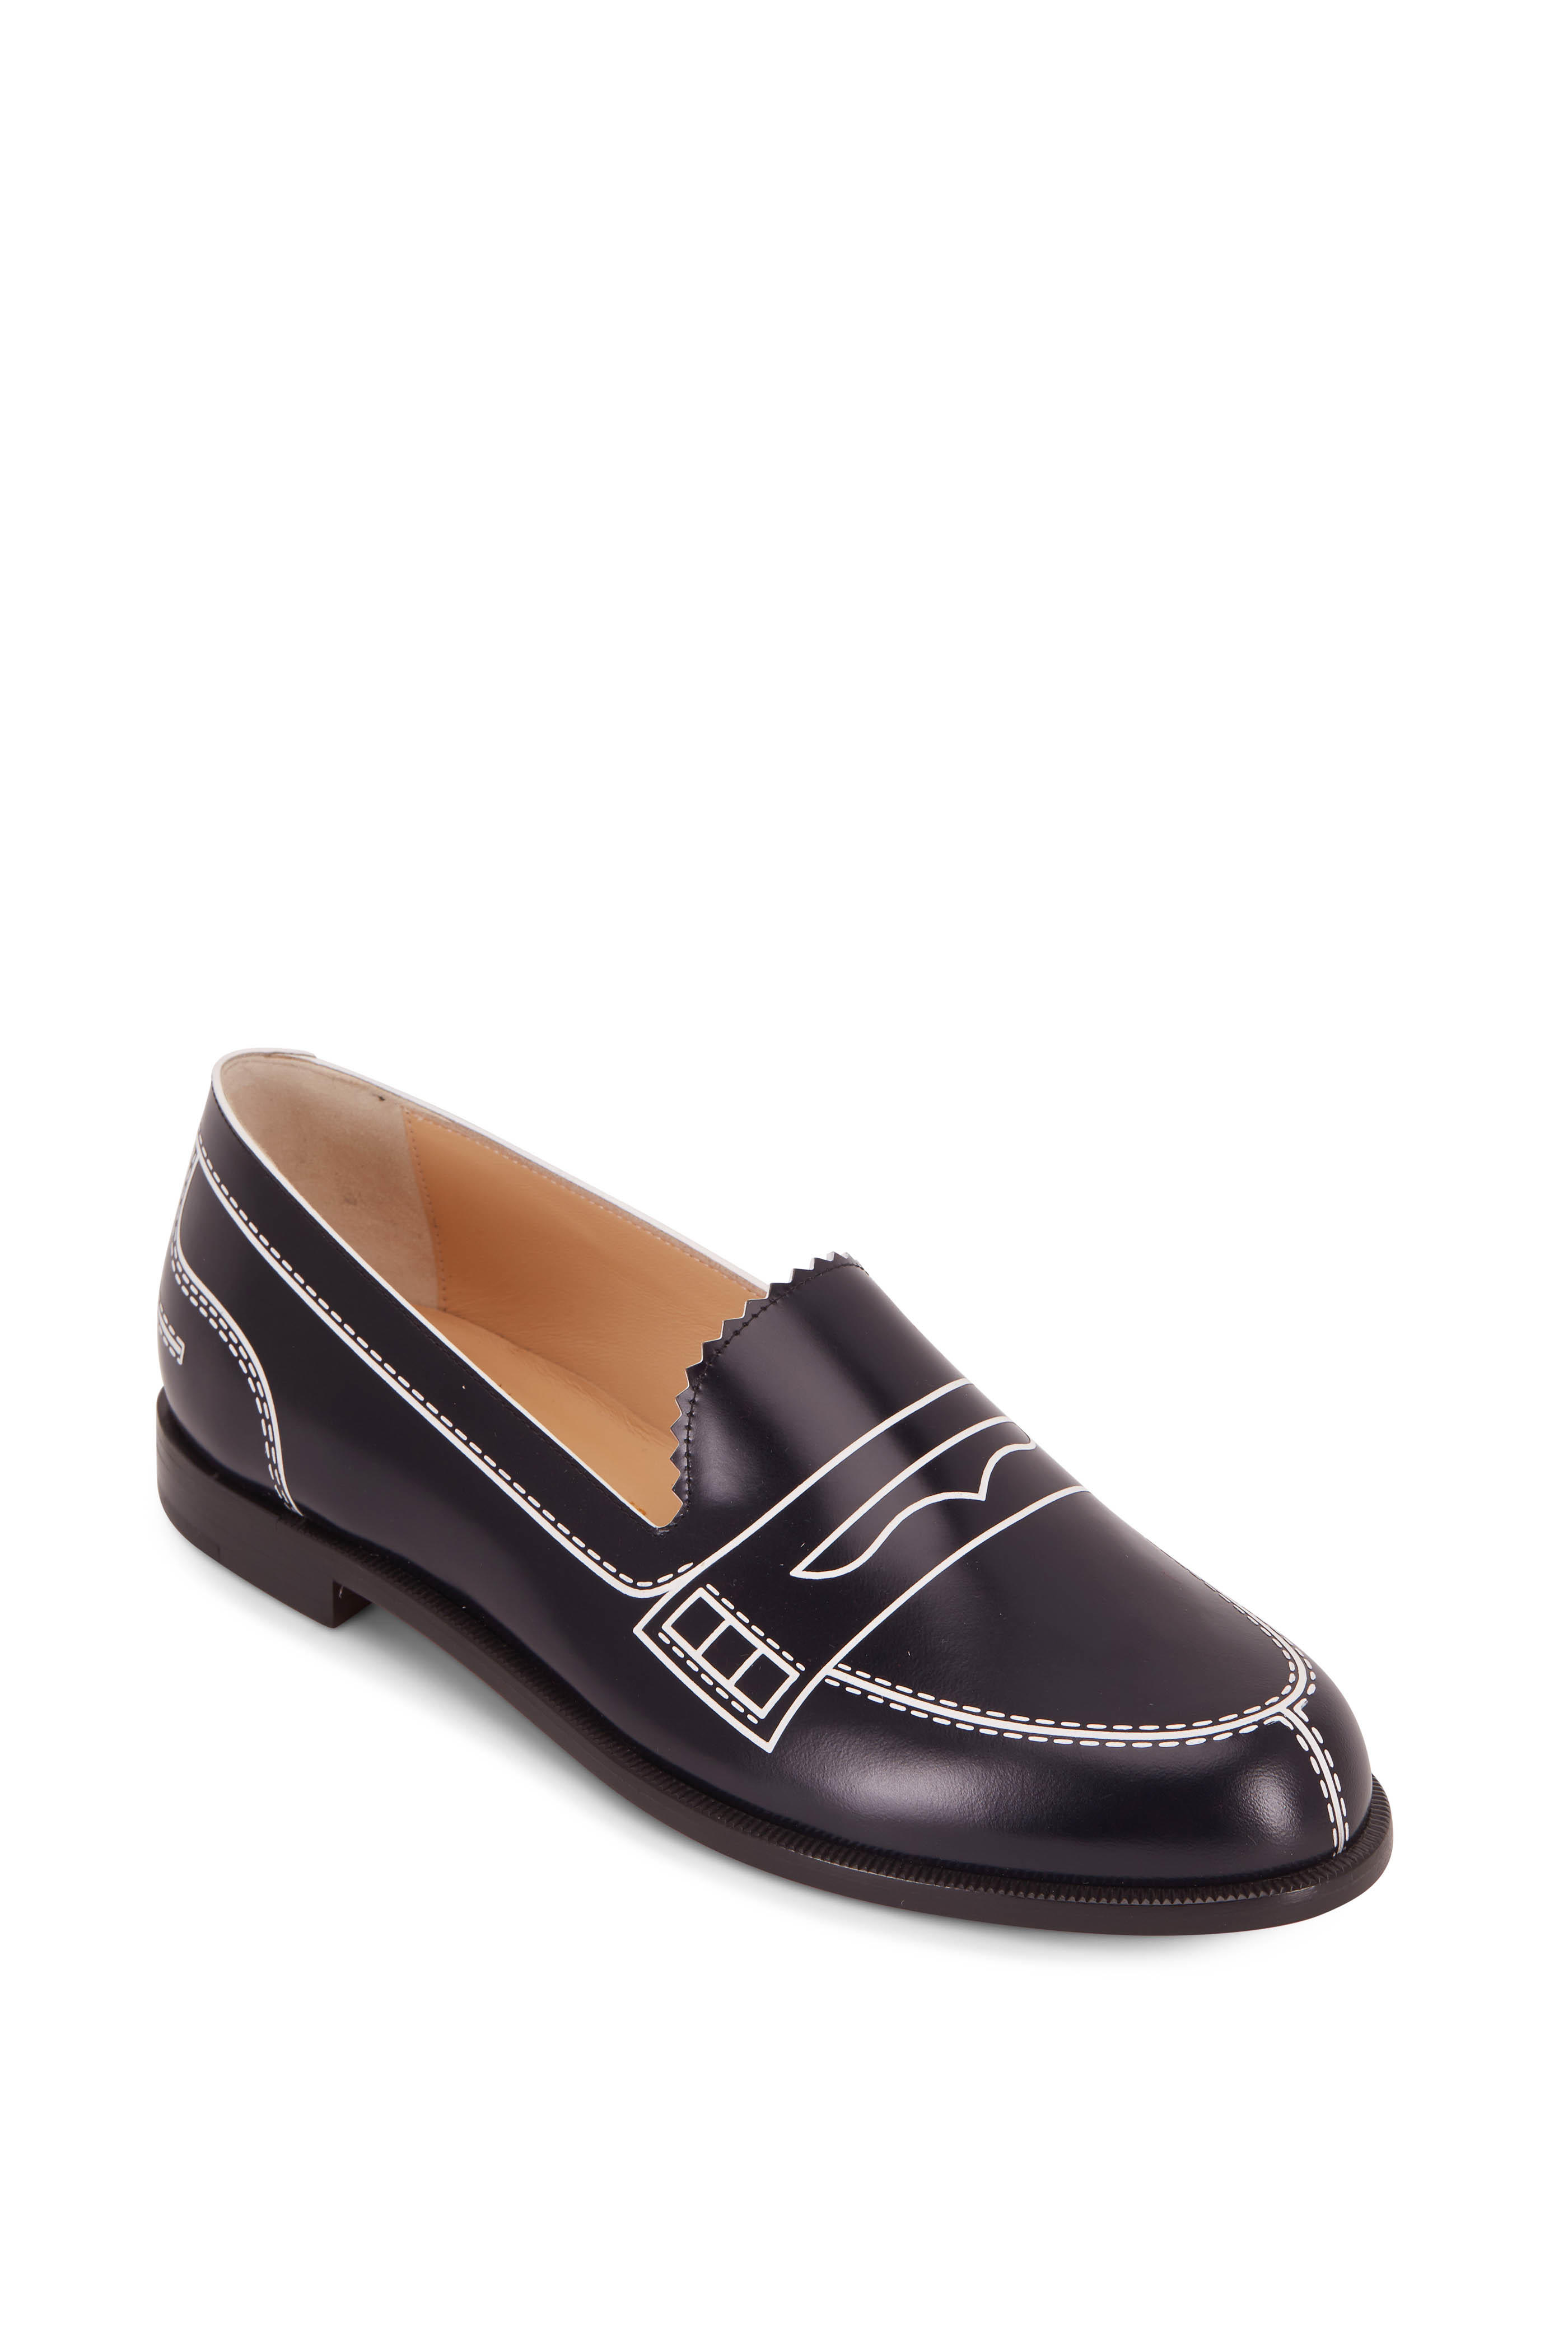 navy and white loafers